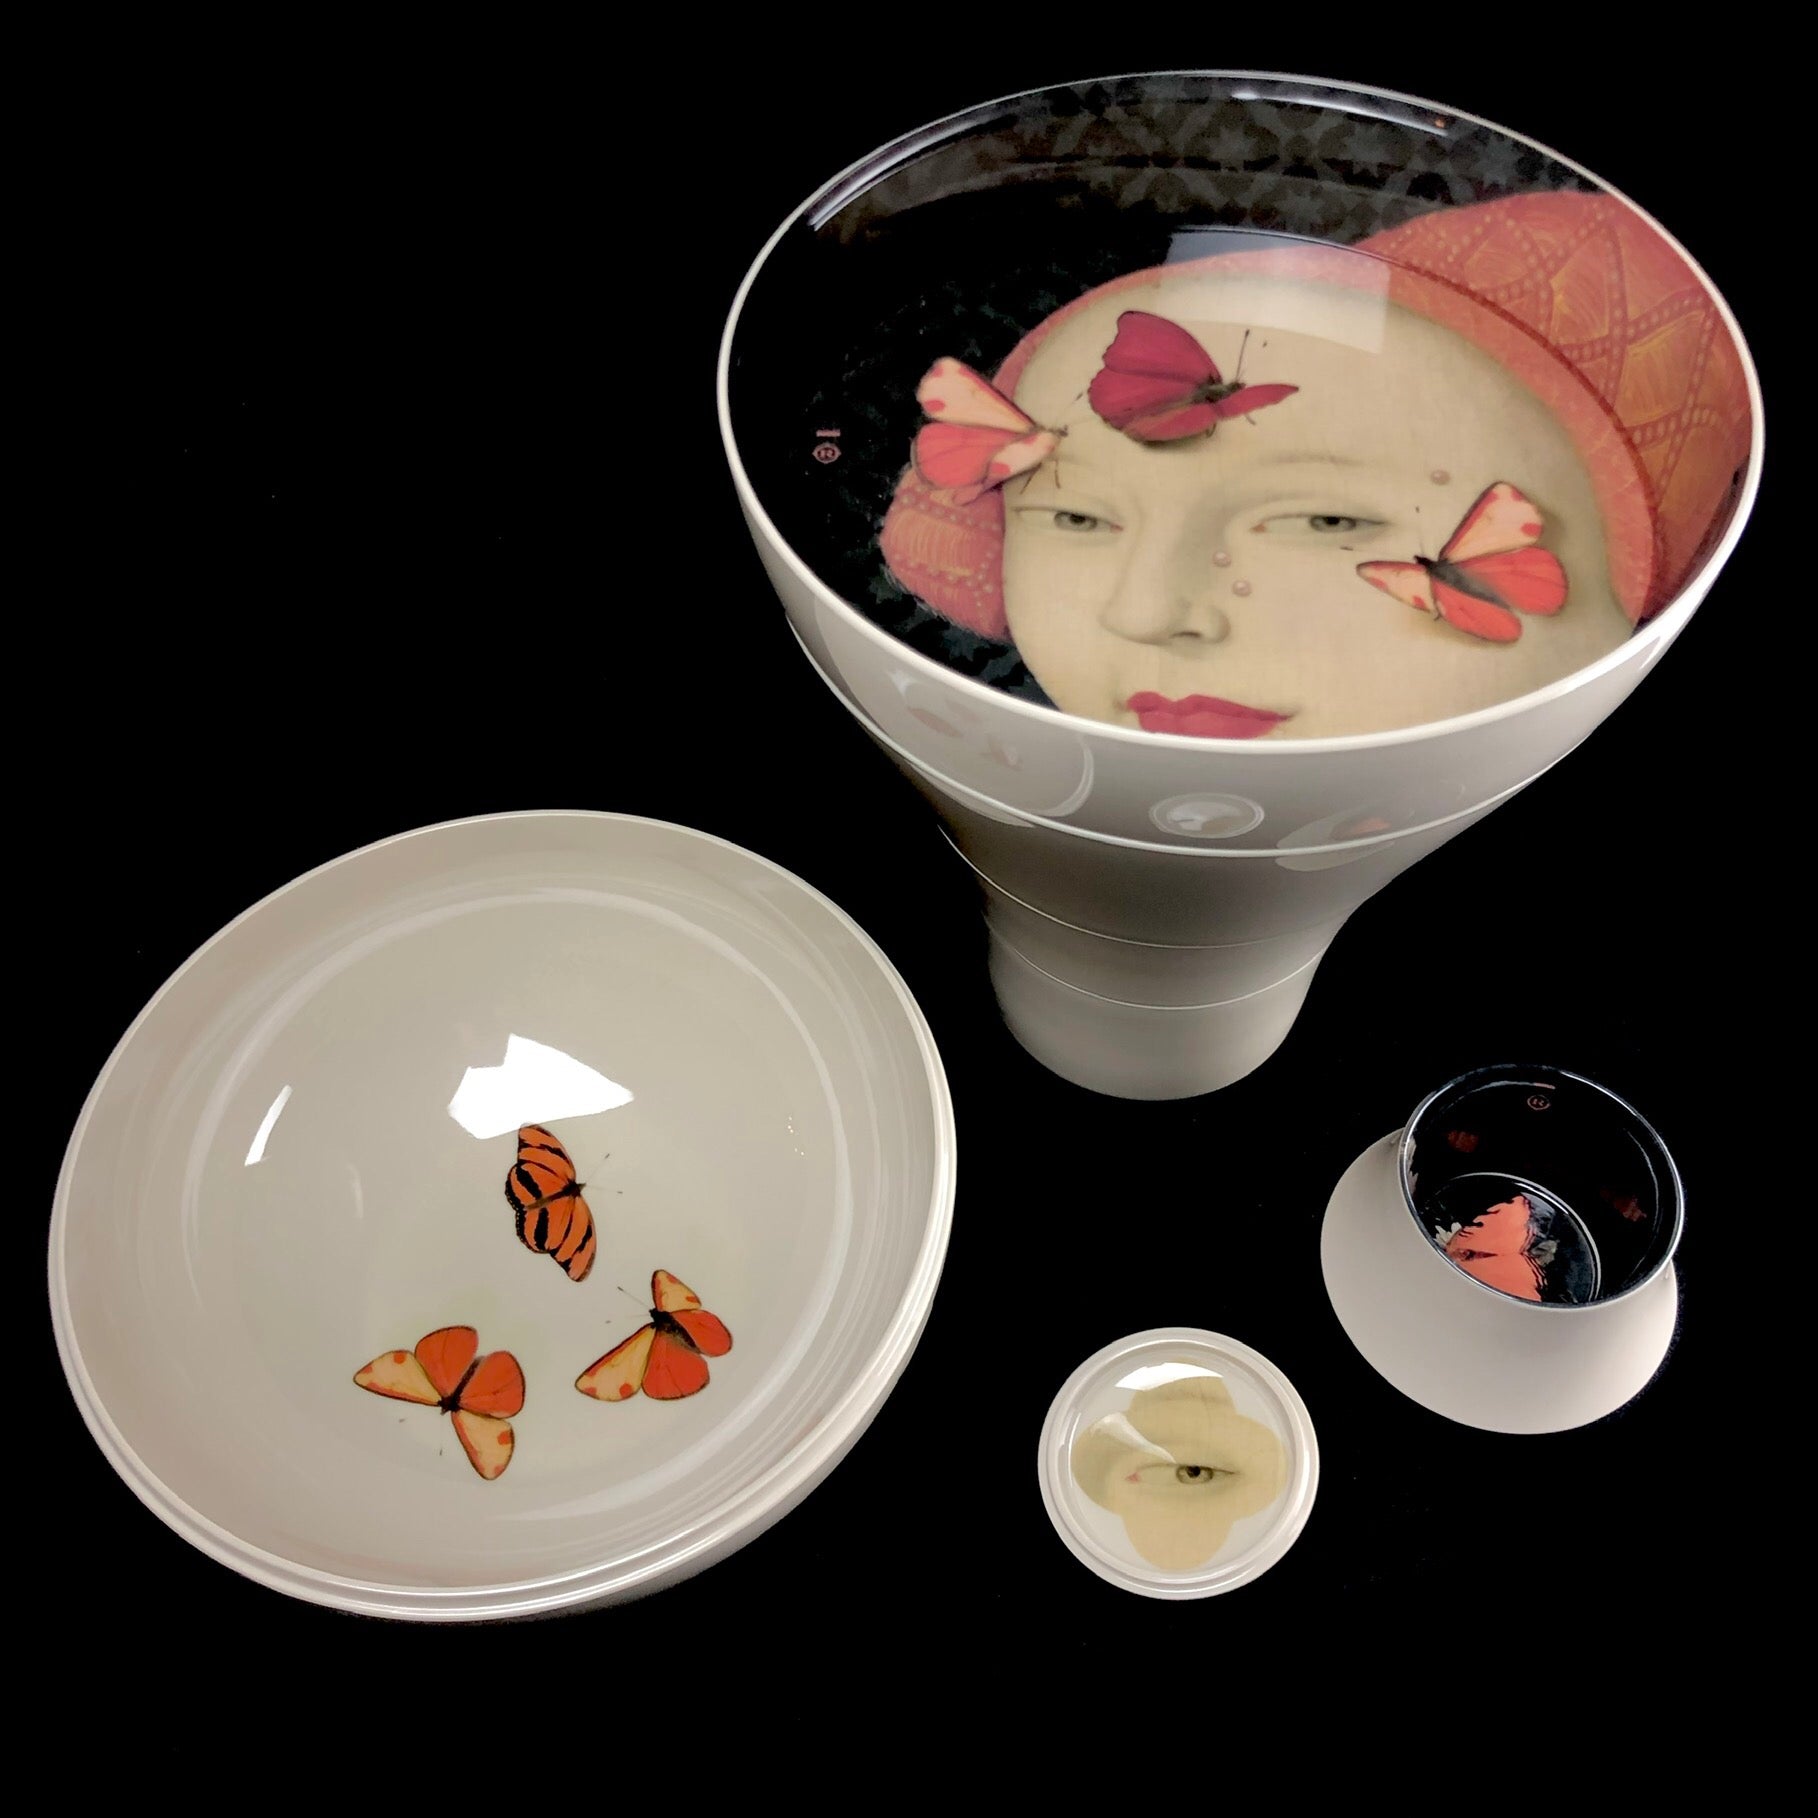 Ming Dishware set half deconstructed with face of young woman inside